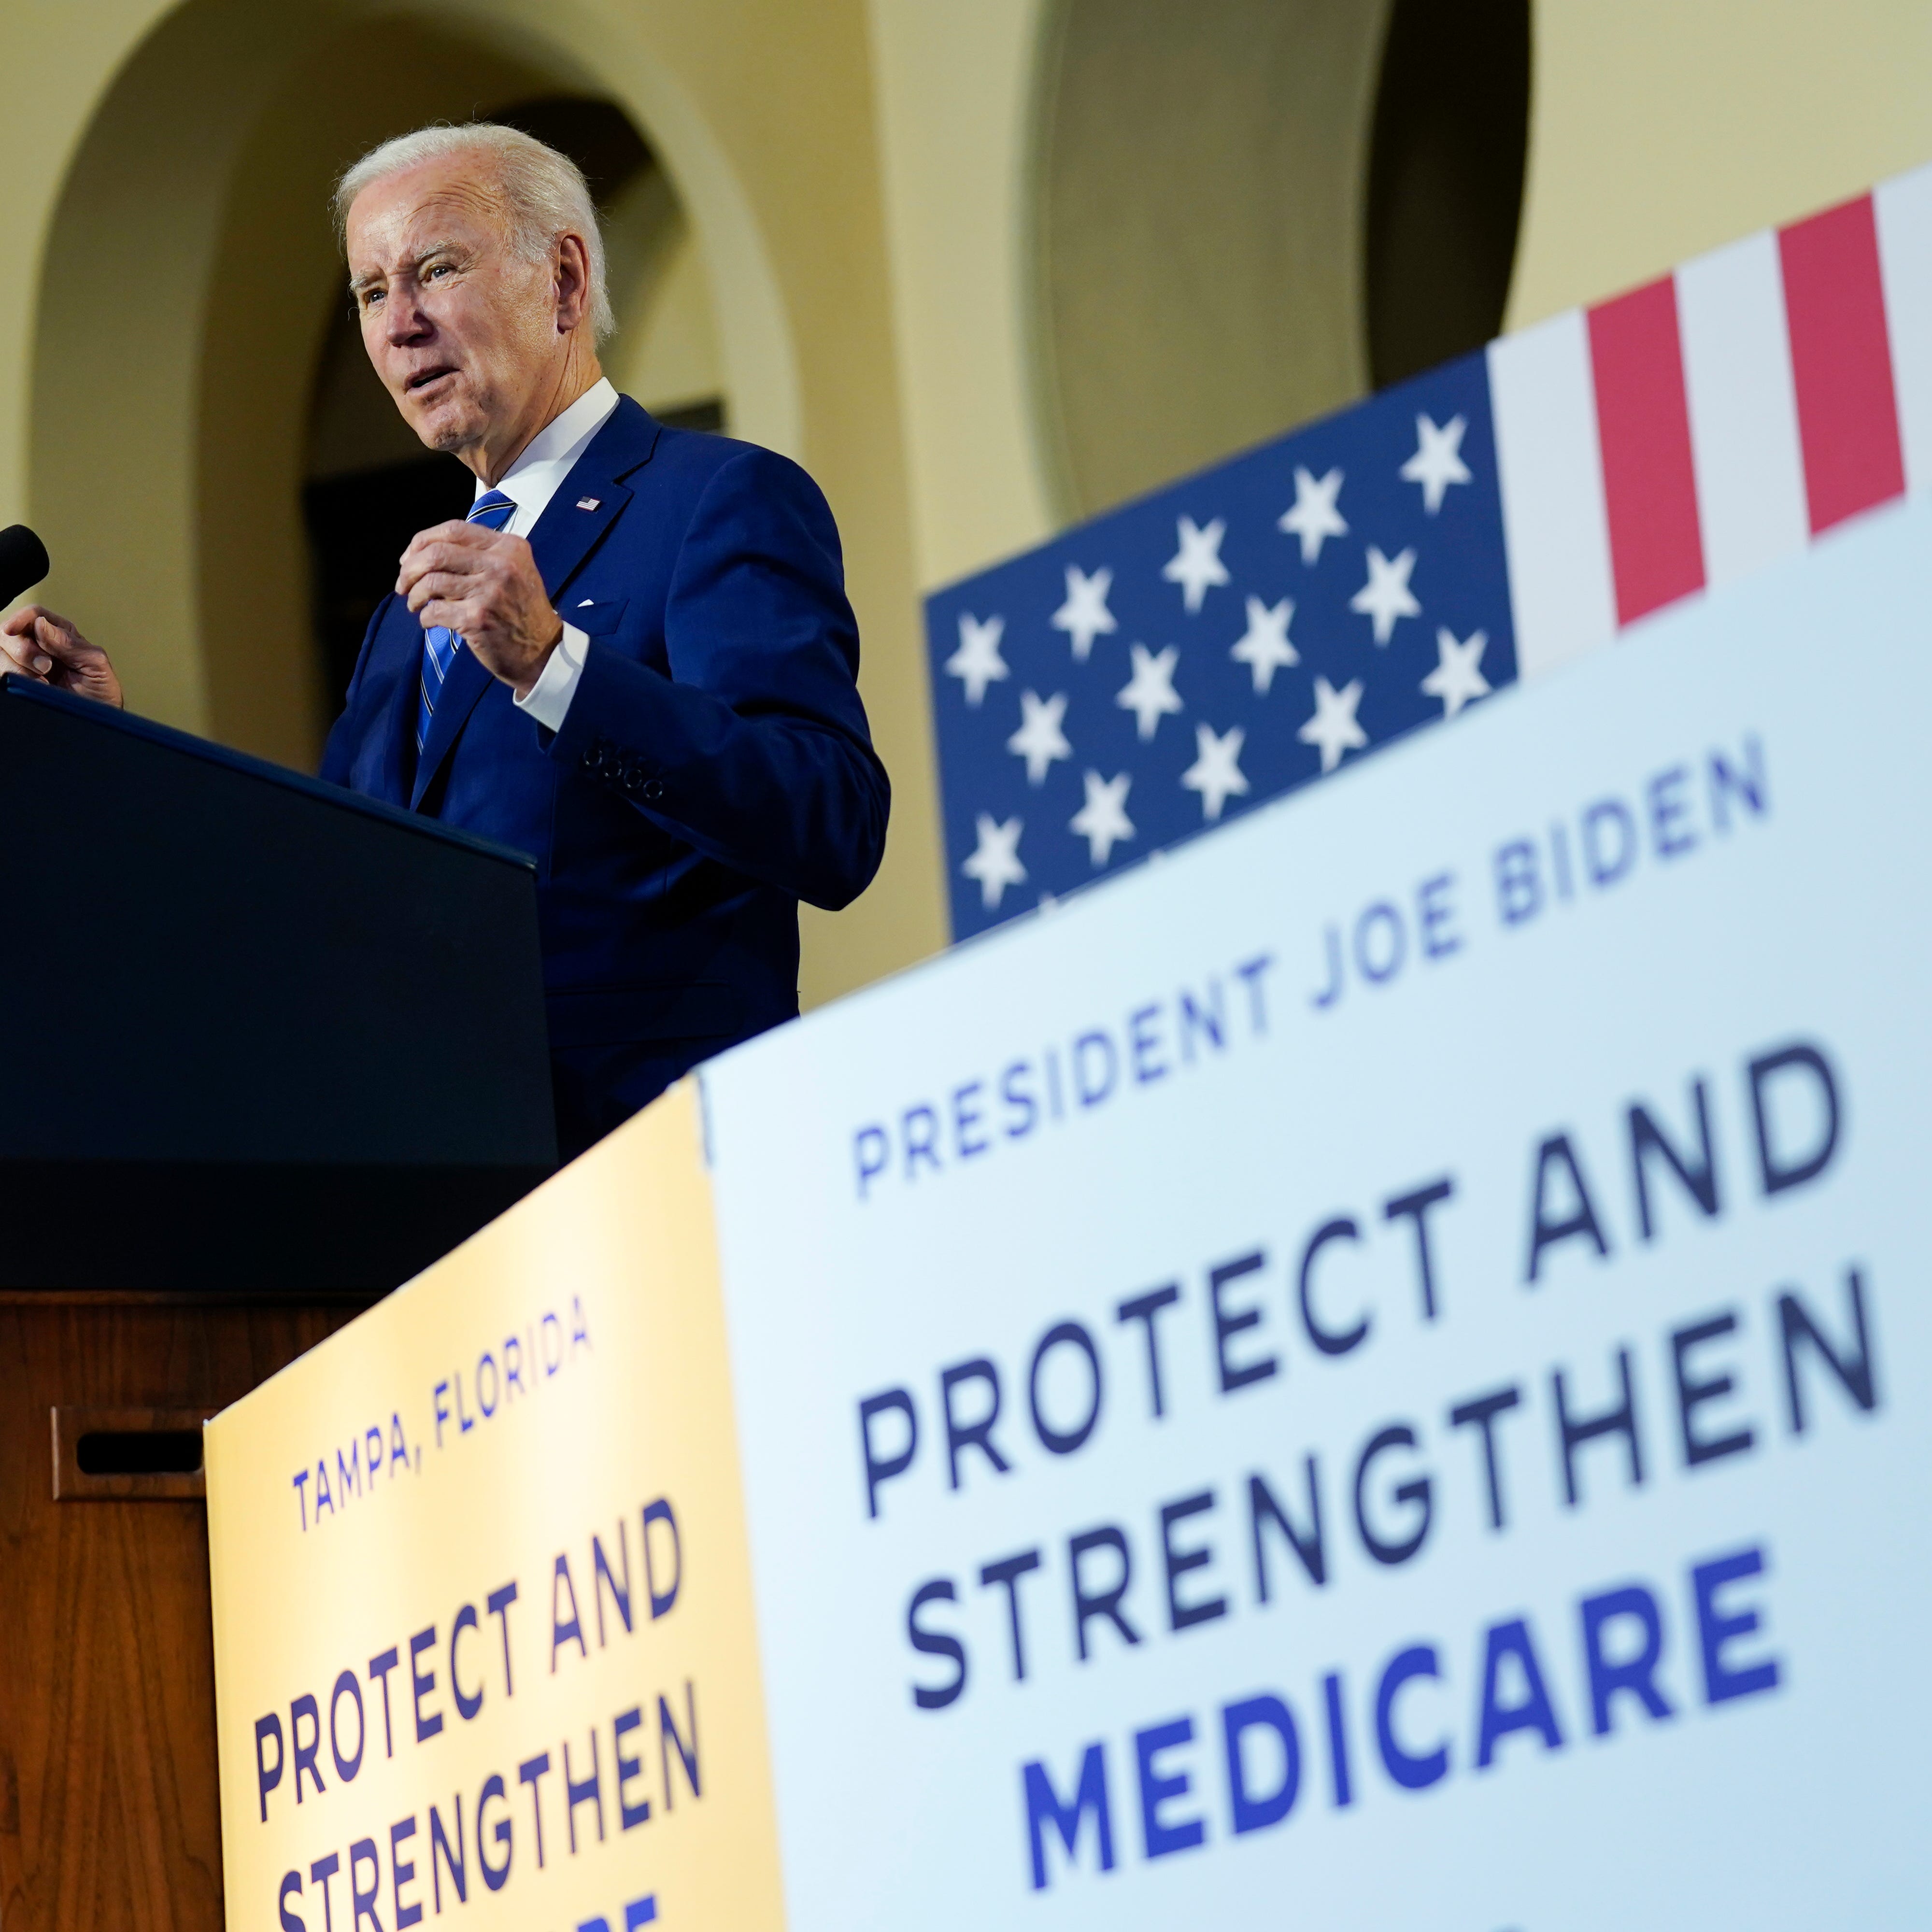 President Joe Biden speaks about his administration's plans to protect Social Security and Medicare and lower healthcare costs, Feb. 9, 2023, at the University of Tampa in Tampa, Florida.